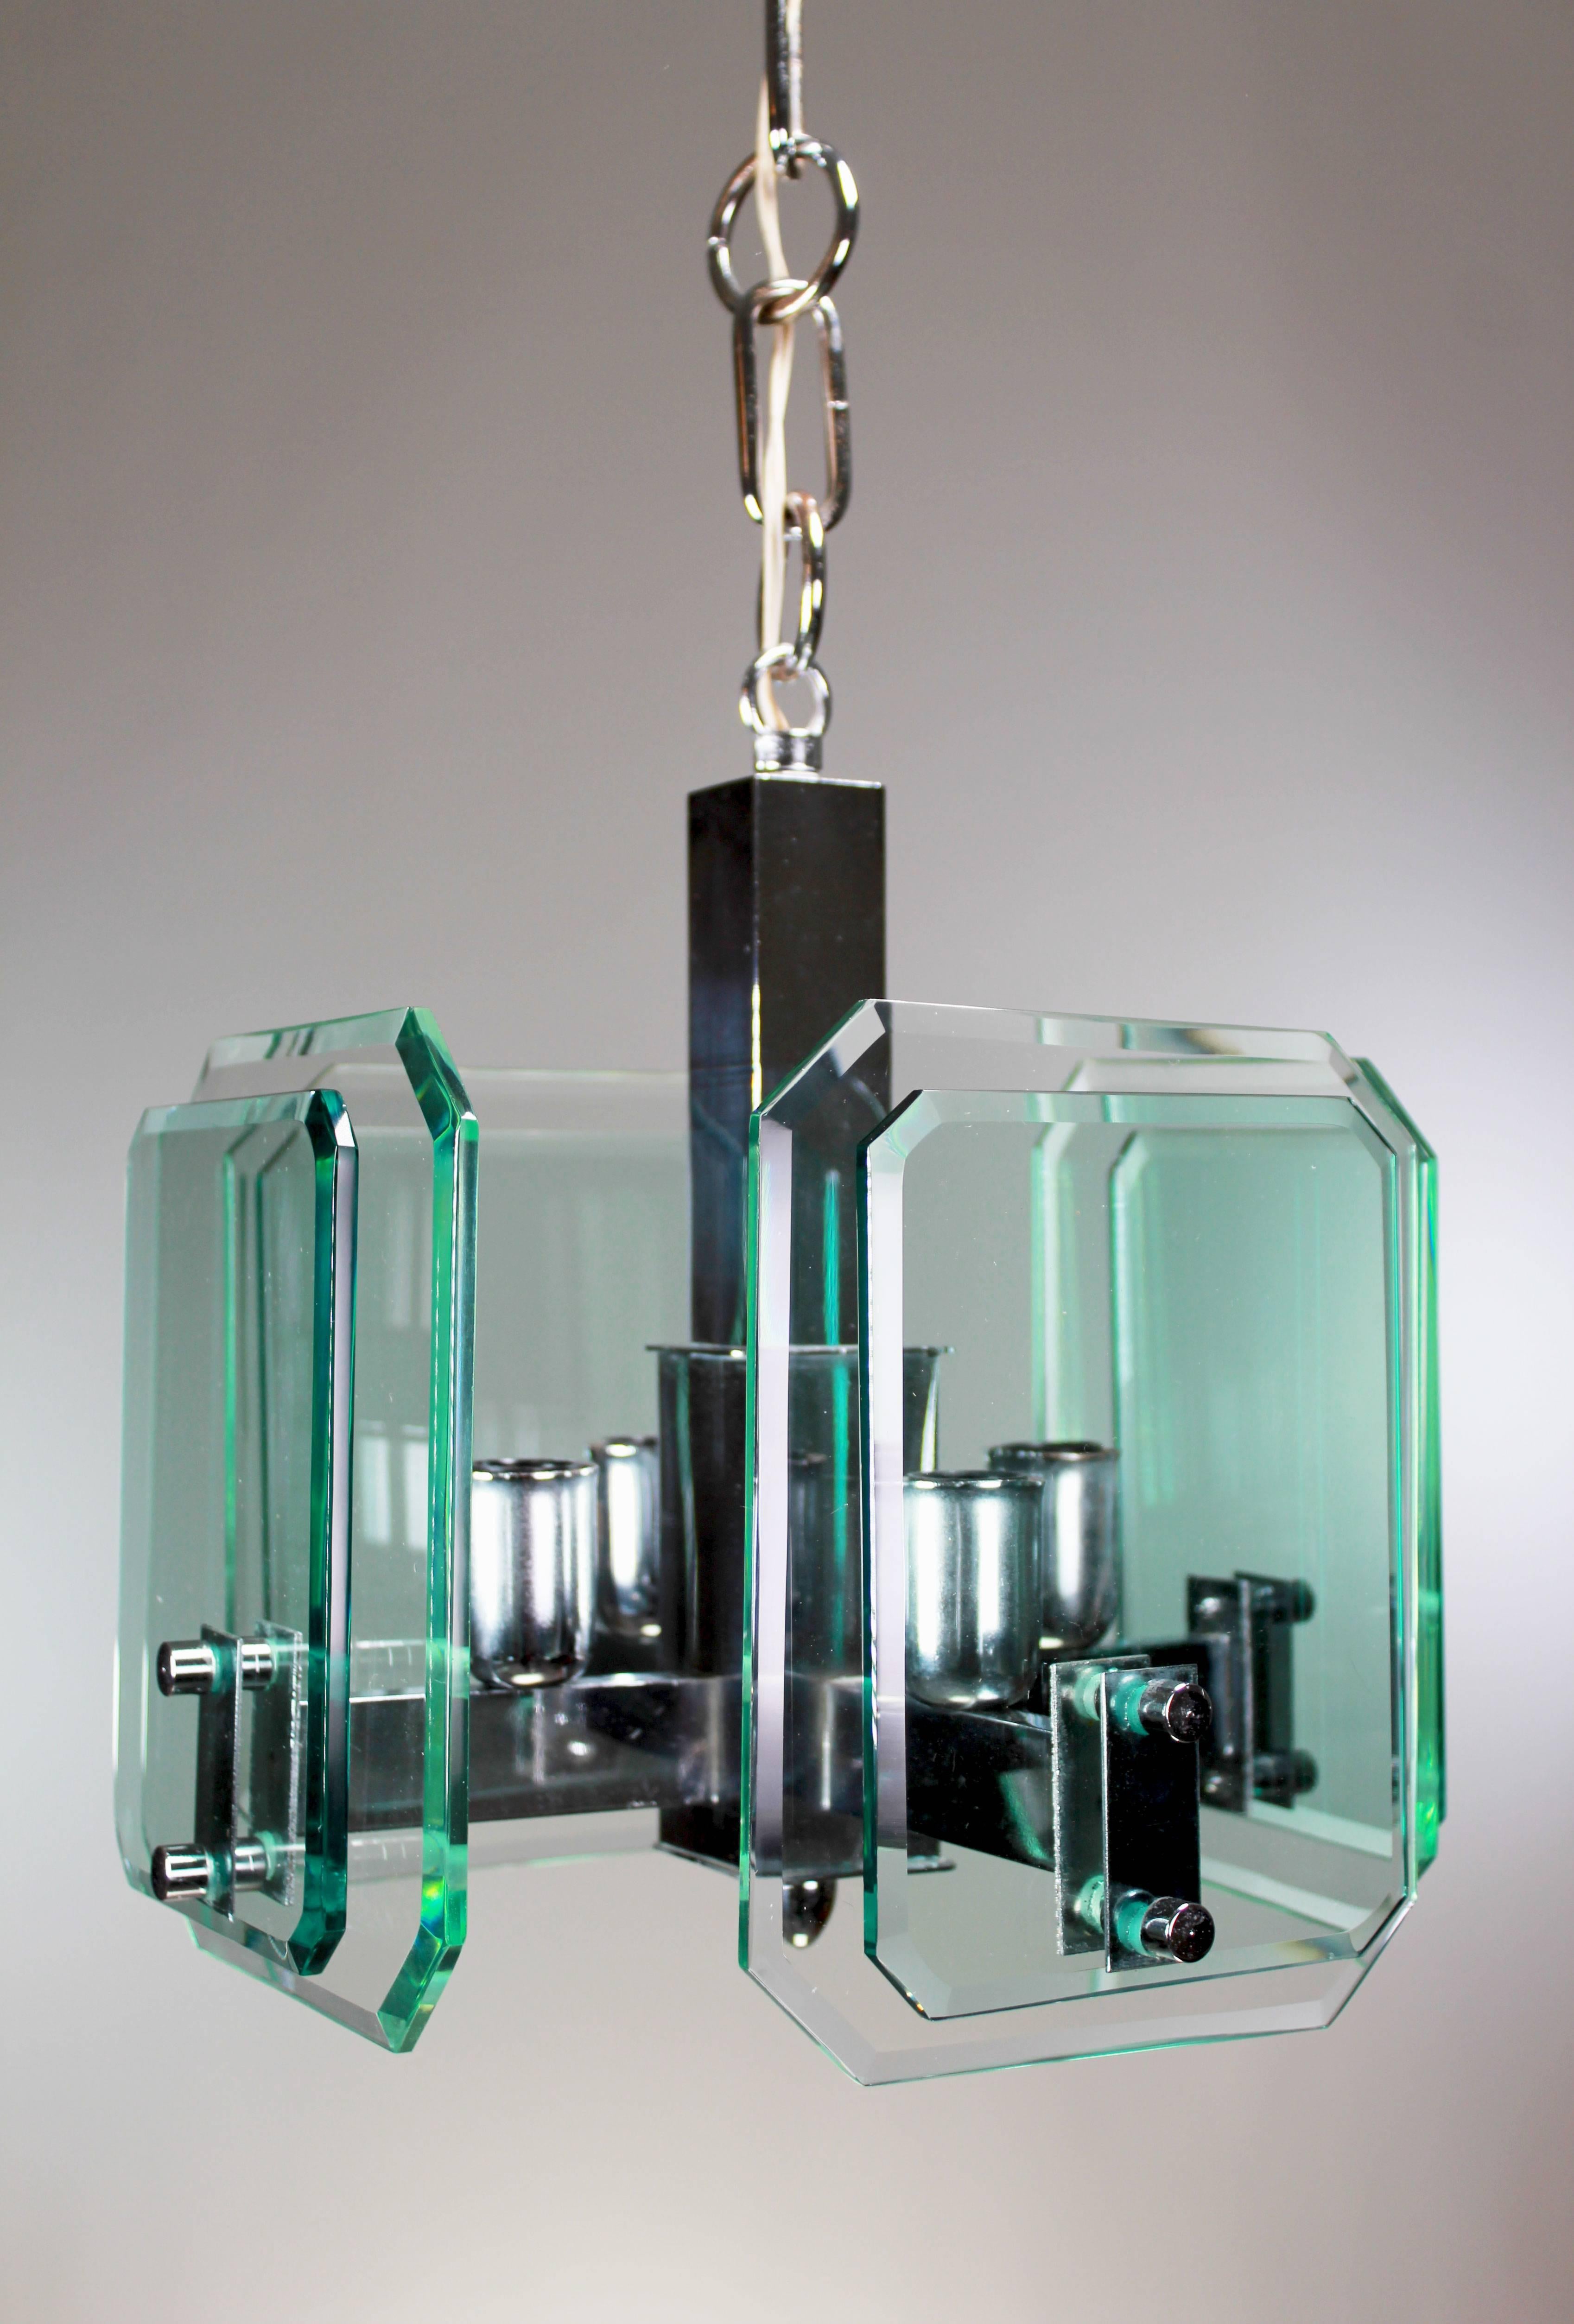 Beautiful architectural Italian Mid Century Modern pendant with chrome arms holding eight plates of cut tempered glass with a green tint in two different sizes. In the style of Fontana Arte, attributed to Veca. Manufactured in Italy in the early